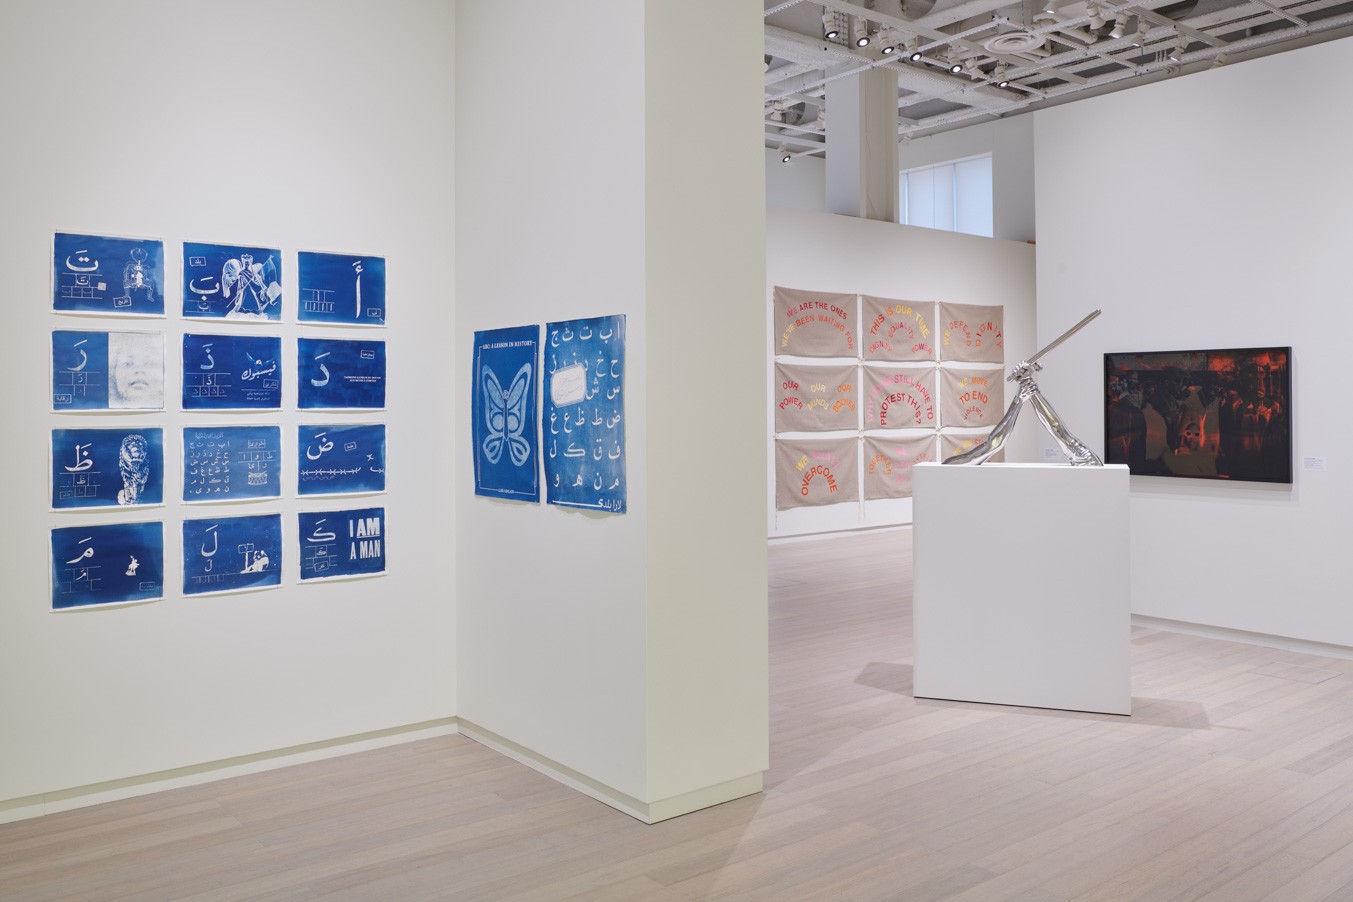 Installation view showing works by the artists Lara Baladi and Hank Willis Thomas from the exhibition “The Protest and The Recuperation” on view at the Wallach Art Gallery, Columbia University. Photograph by Kyle Knodell.